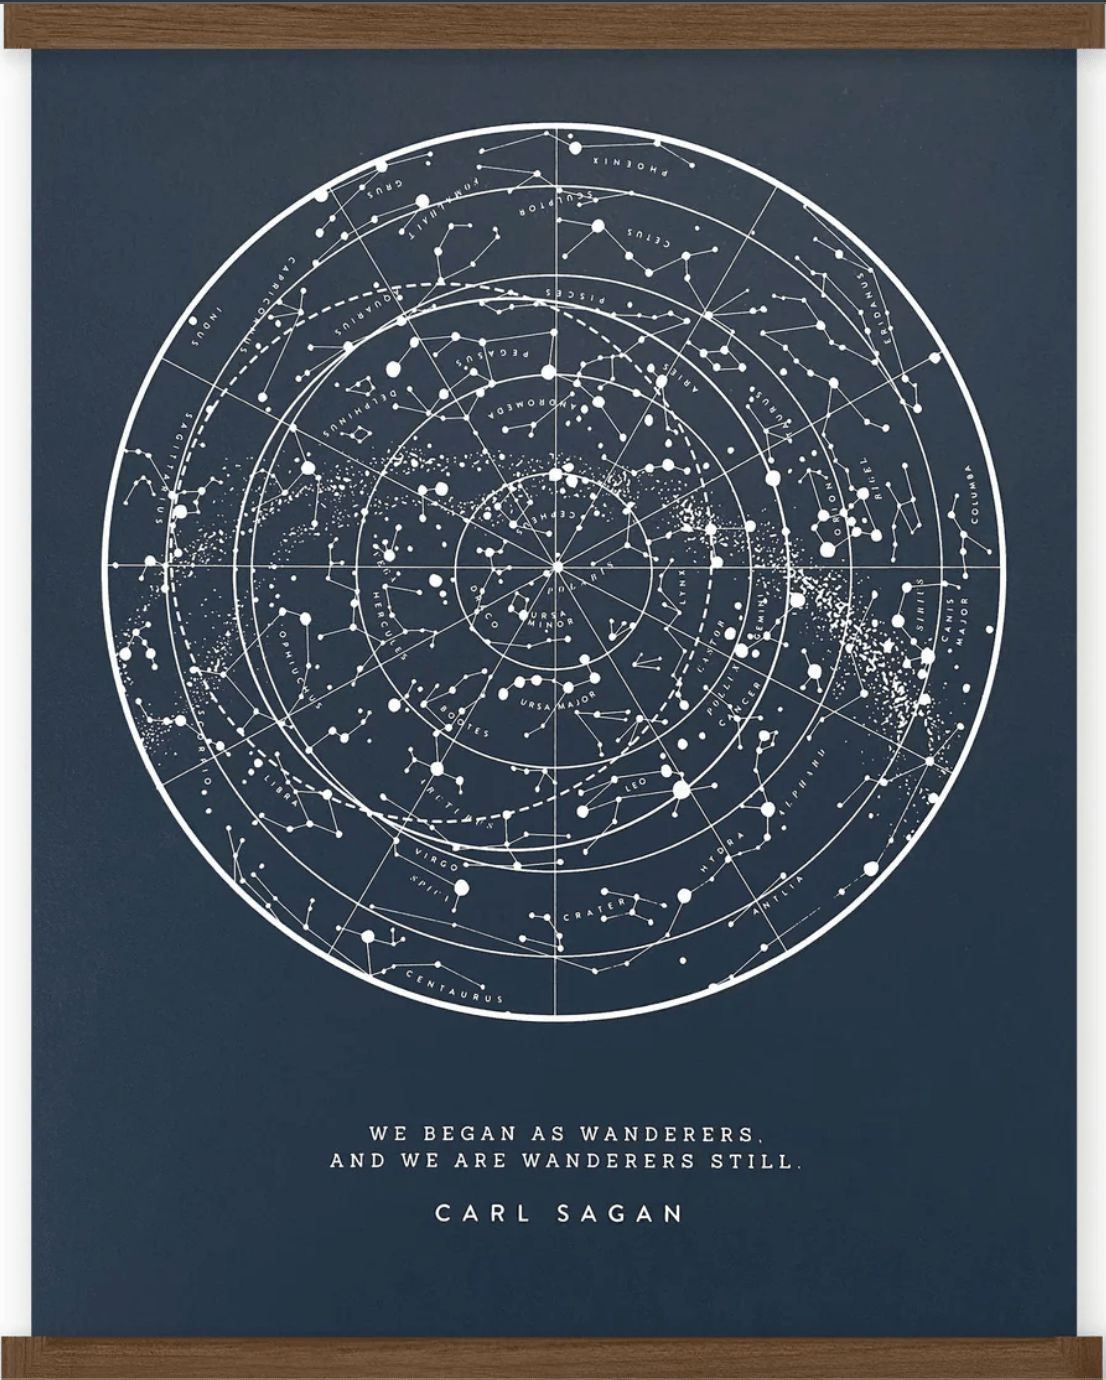 A black and white print of the Sagan Star Chart 18x24 by The Wild Wander.